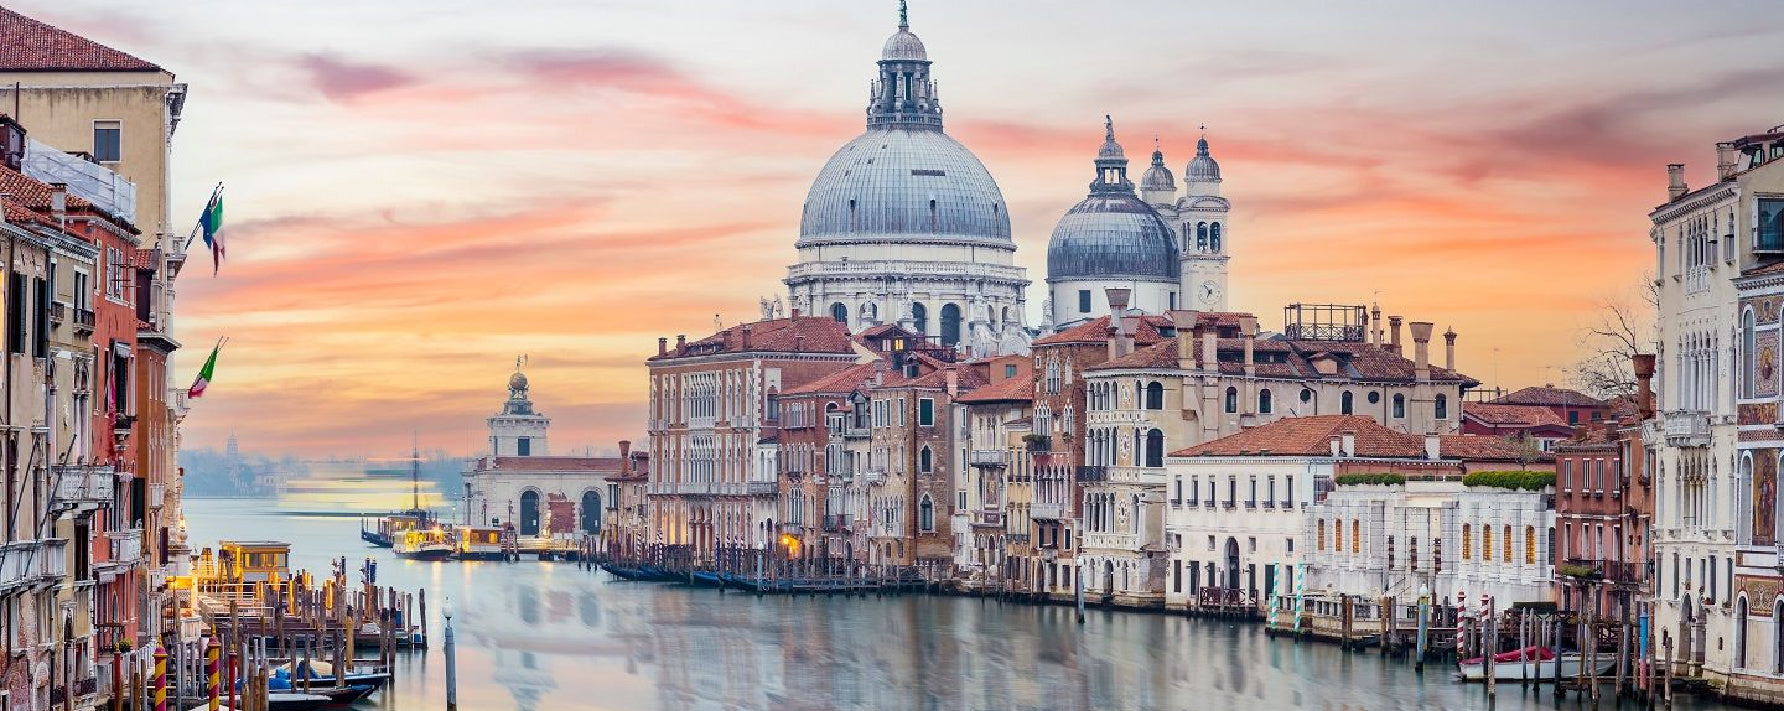 How to Capture The Magic of Venice in Your Home